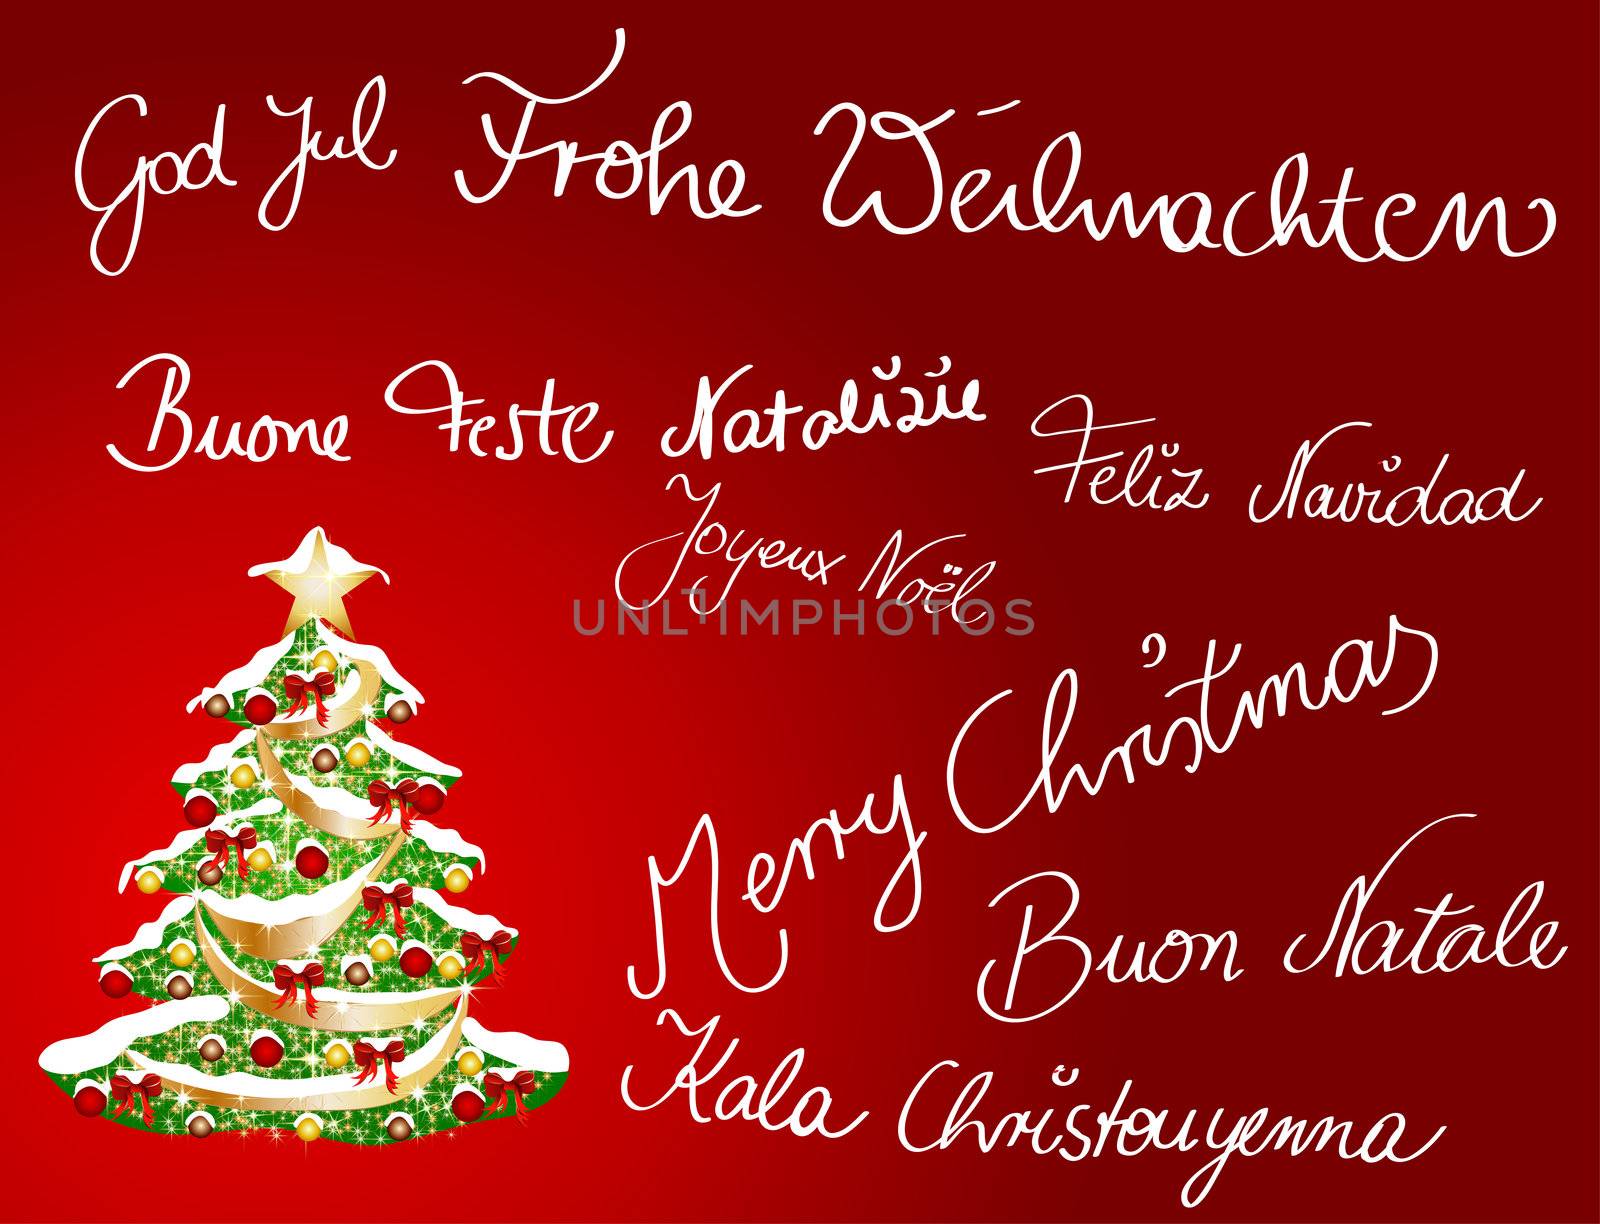 Multilingual Christmascard by peromarketing